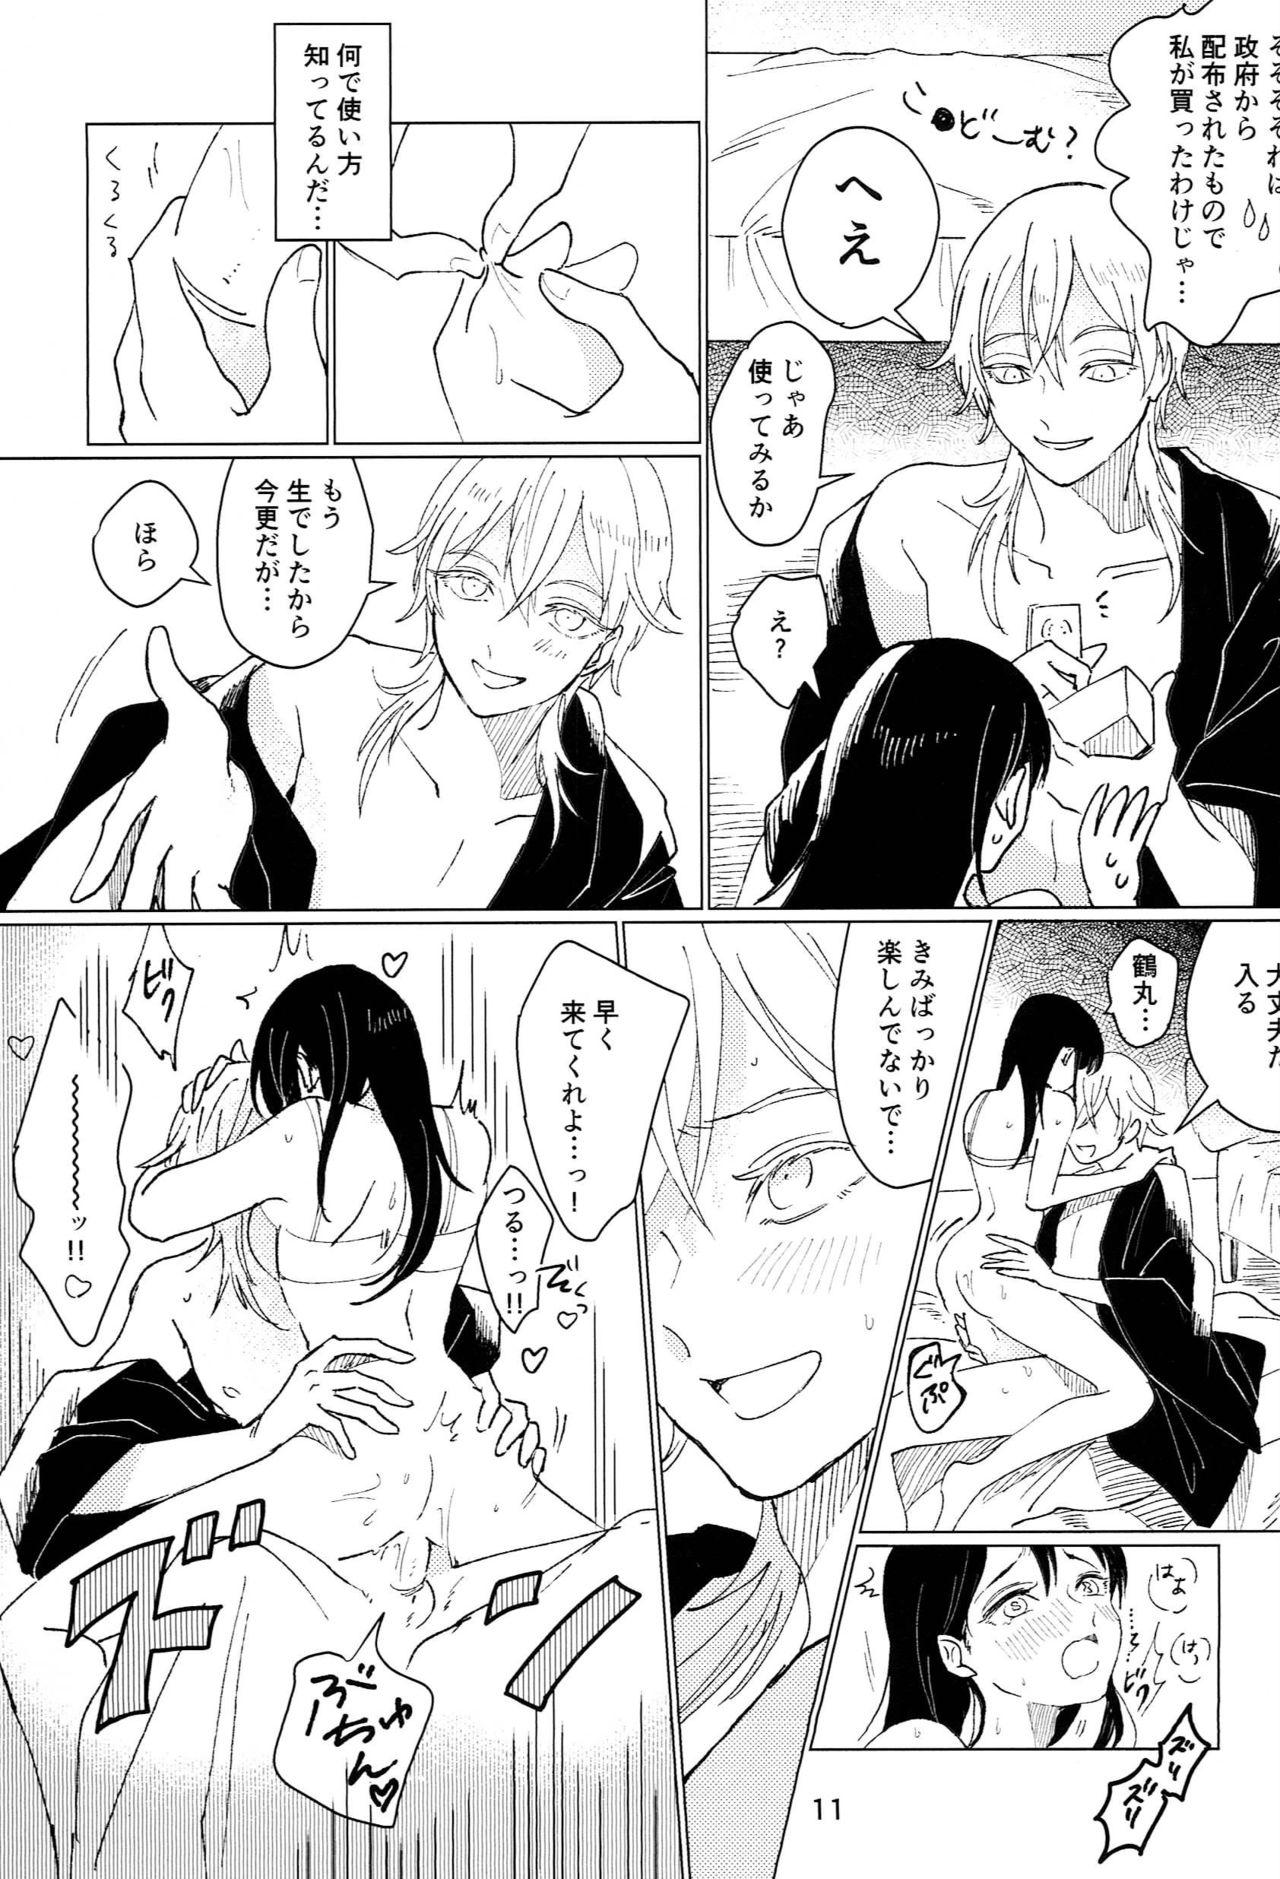 Muscles Private Room - Touken ranbu Girl Girl - Page 10